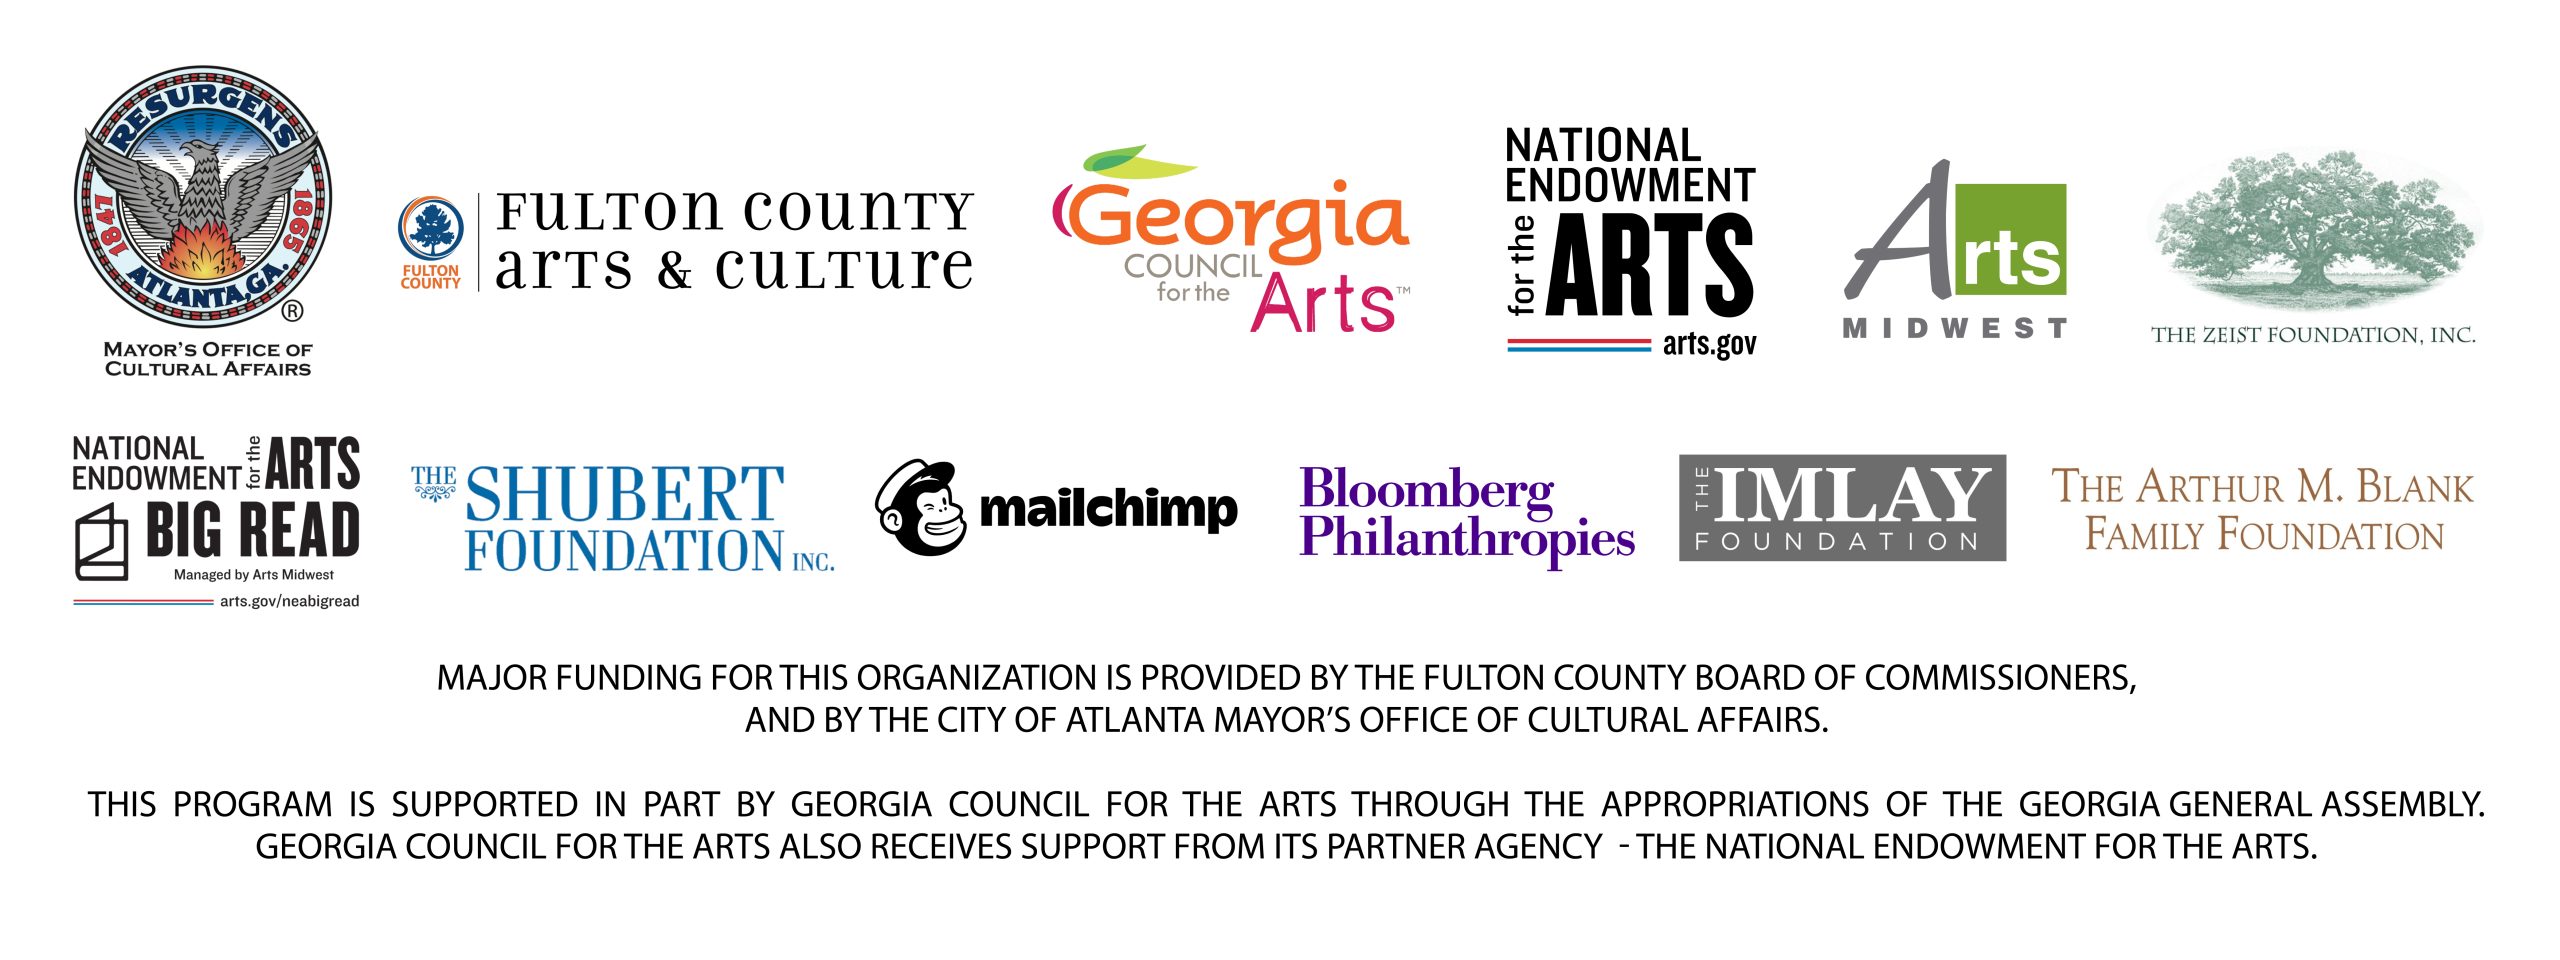 Sponsor logos are as follows: Atlanta Georgia Mayor's Office of Cultural Affairs, Fulton County Arts and Culture, Georgia Council for the Arts, National Endowment for the Arts, Arts Midwest, The Zeist Foundation Inc, N.E.A. Big Read, The Shubert Foundation, Mailchimp, Bloomberg Philanthropies, The Imlay Foundation, The Arthur M. Blank Family Foundation.